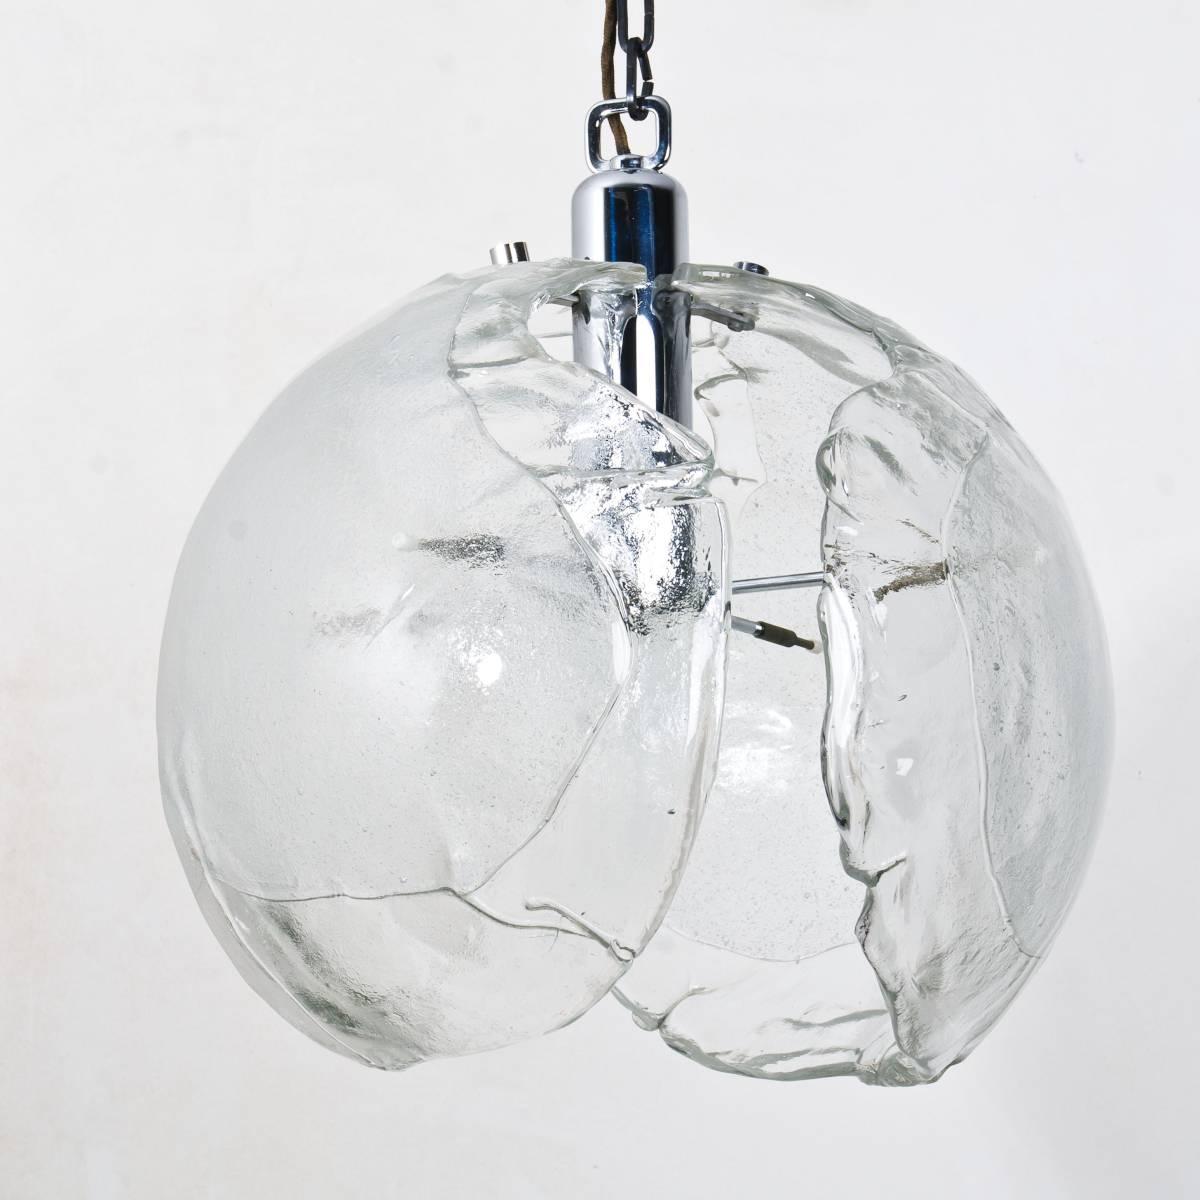 A Mid-Century Modern pendant light, circa 1970, consisting of three very heavy ´petals´ in clear and milk blown glass and brass hardware, this model is often attributed to Carlo Nason but we can´t confirm this at this point. 

Heavy quality and in